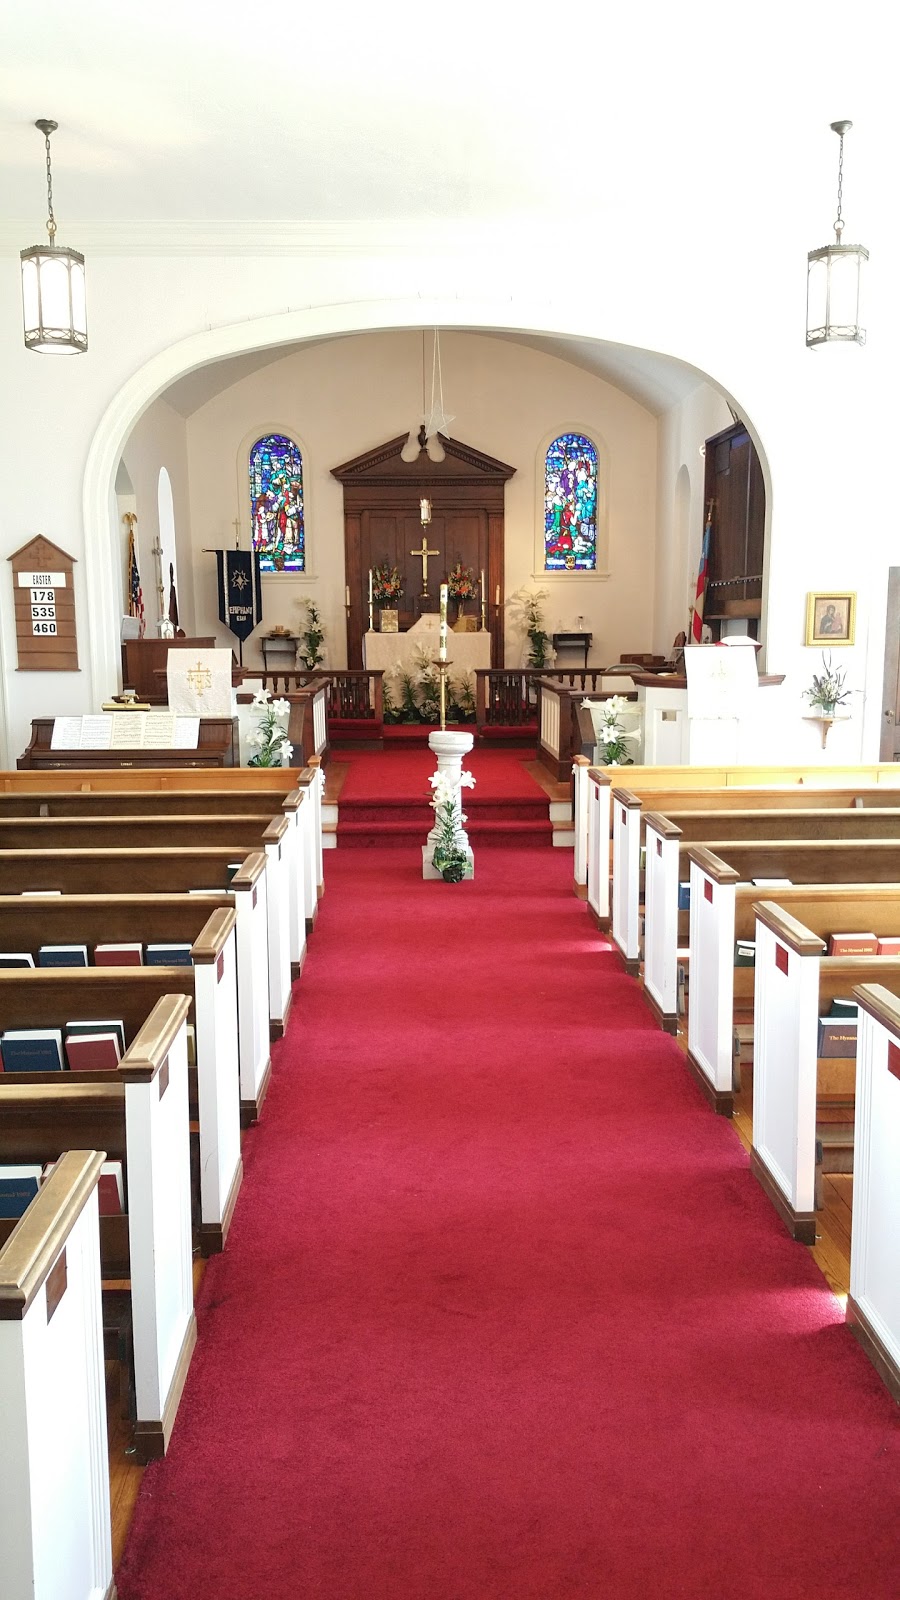 Church of the Epiphany | 538 Henry St, Eden, NC 27288, USA | Phone: (336) 623-9410